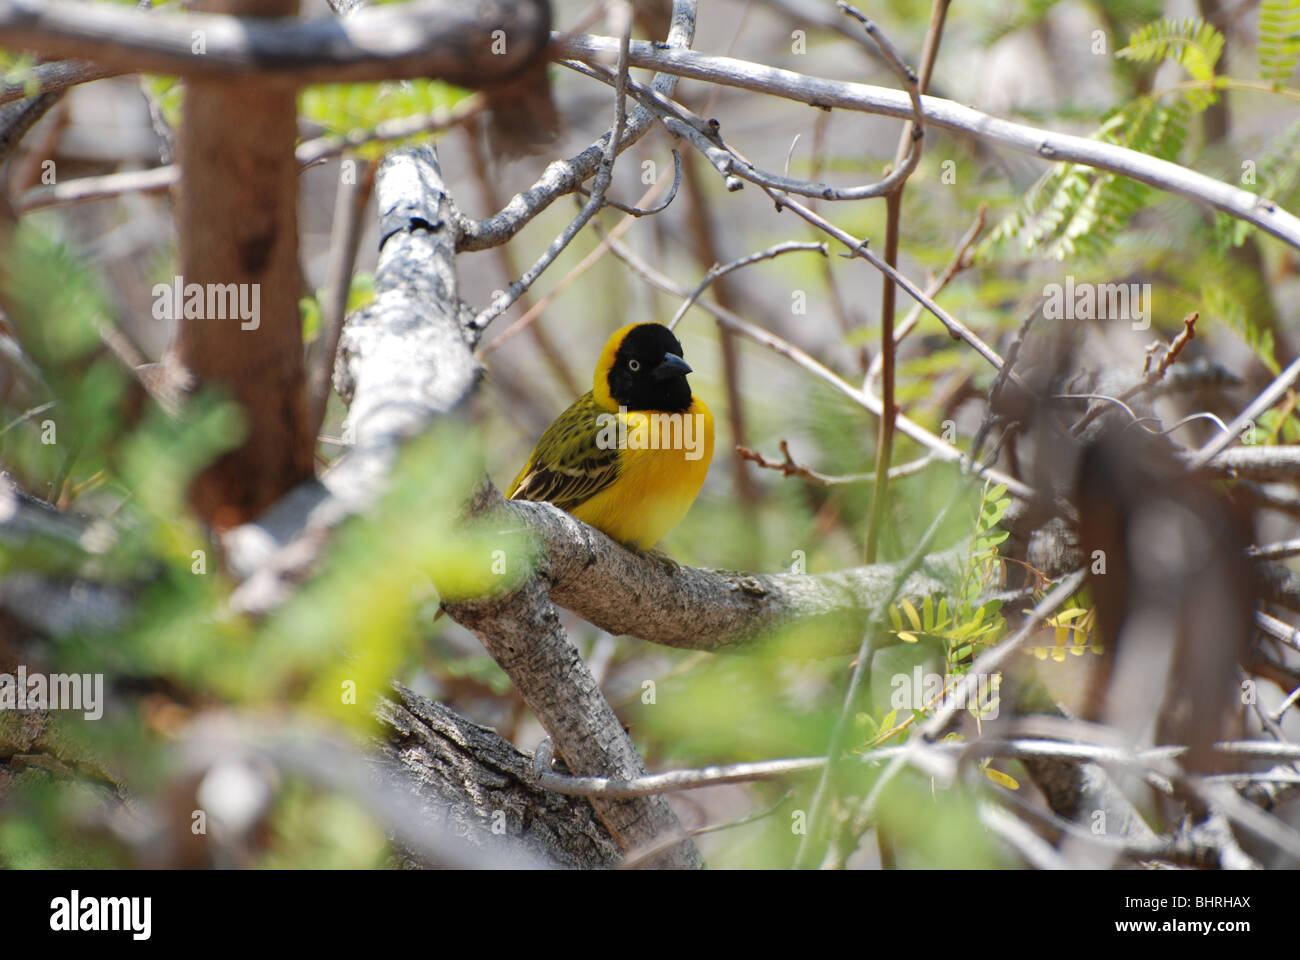 A common weaver bird in a tree Stock Photo